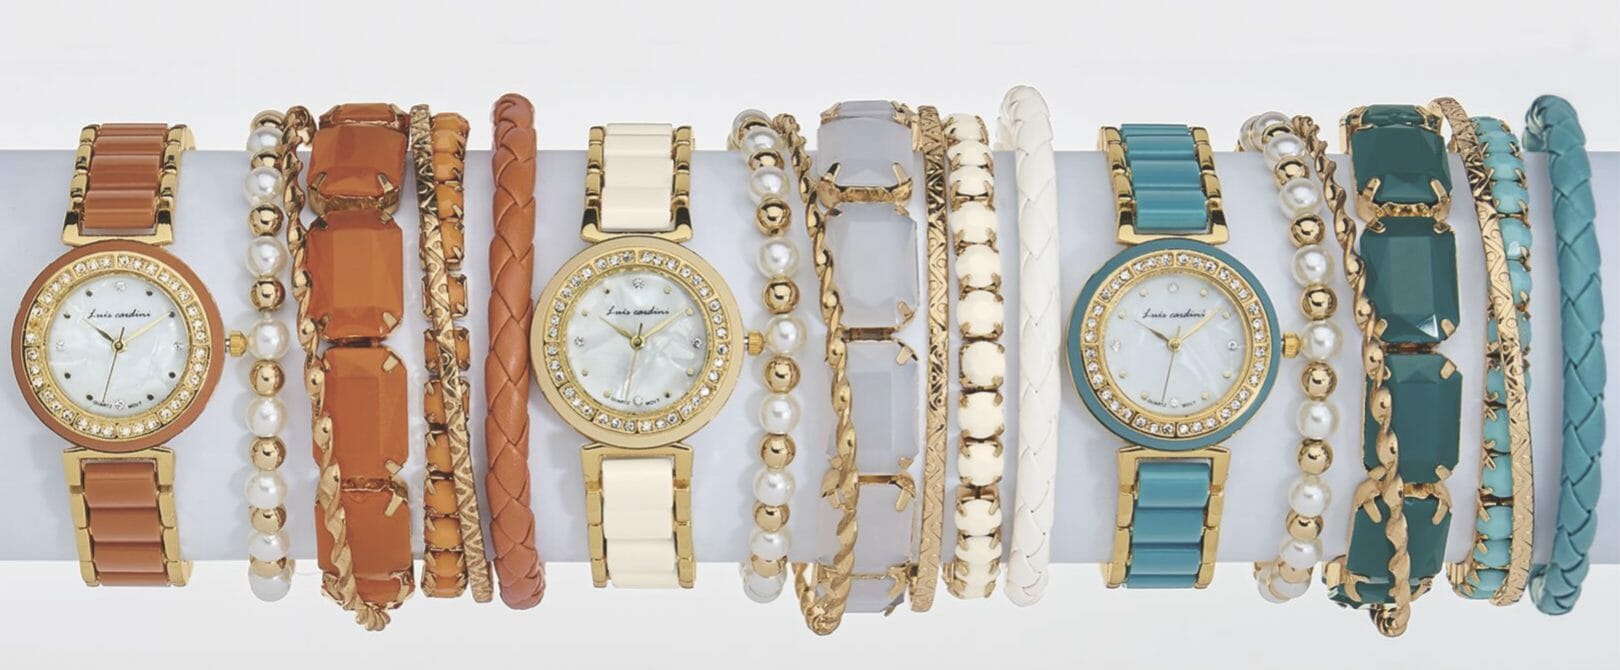 Three women's watch and six bracelet sets, one in ivory and gold, one in teal and gold, and one in sienna and gold.